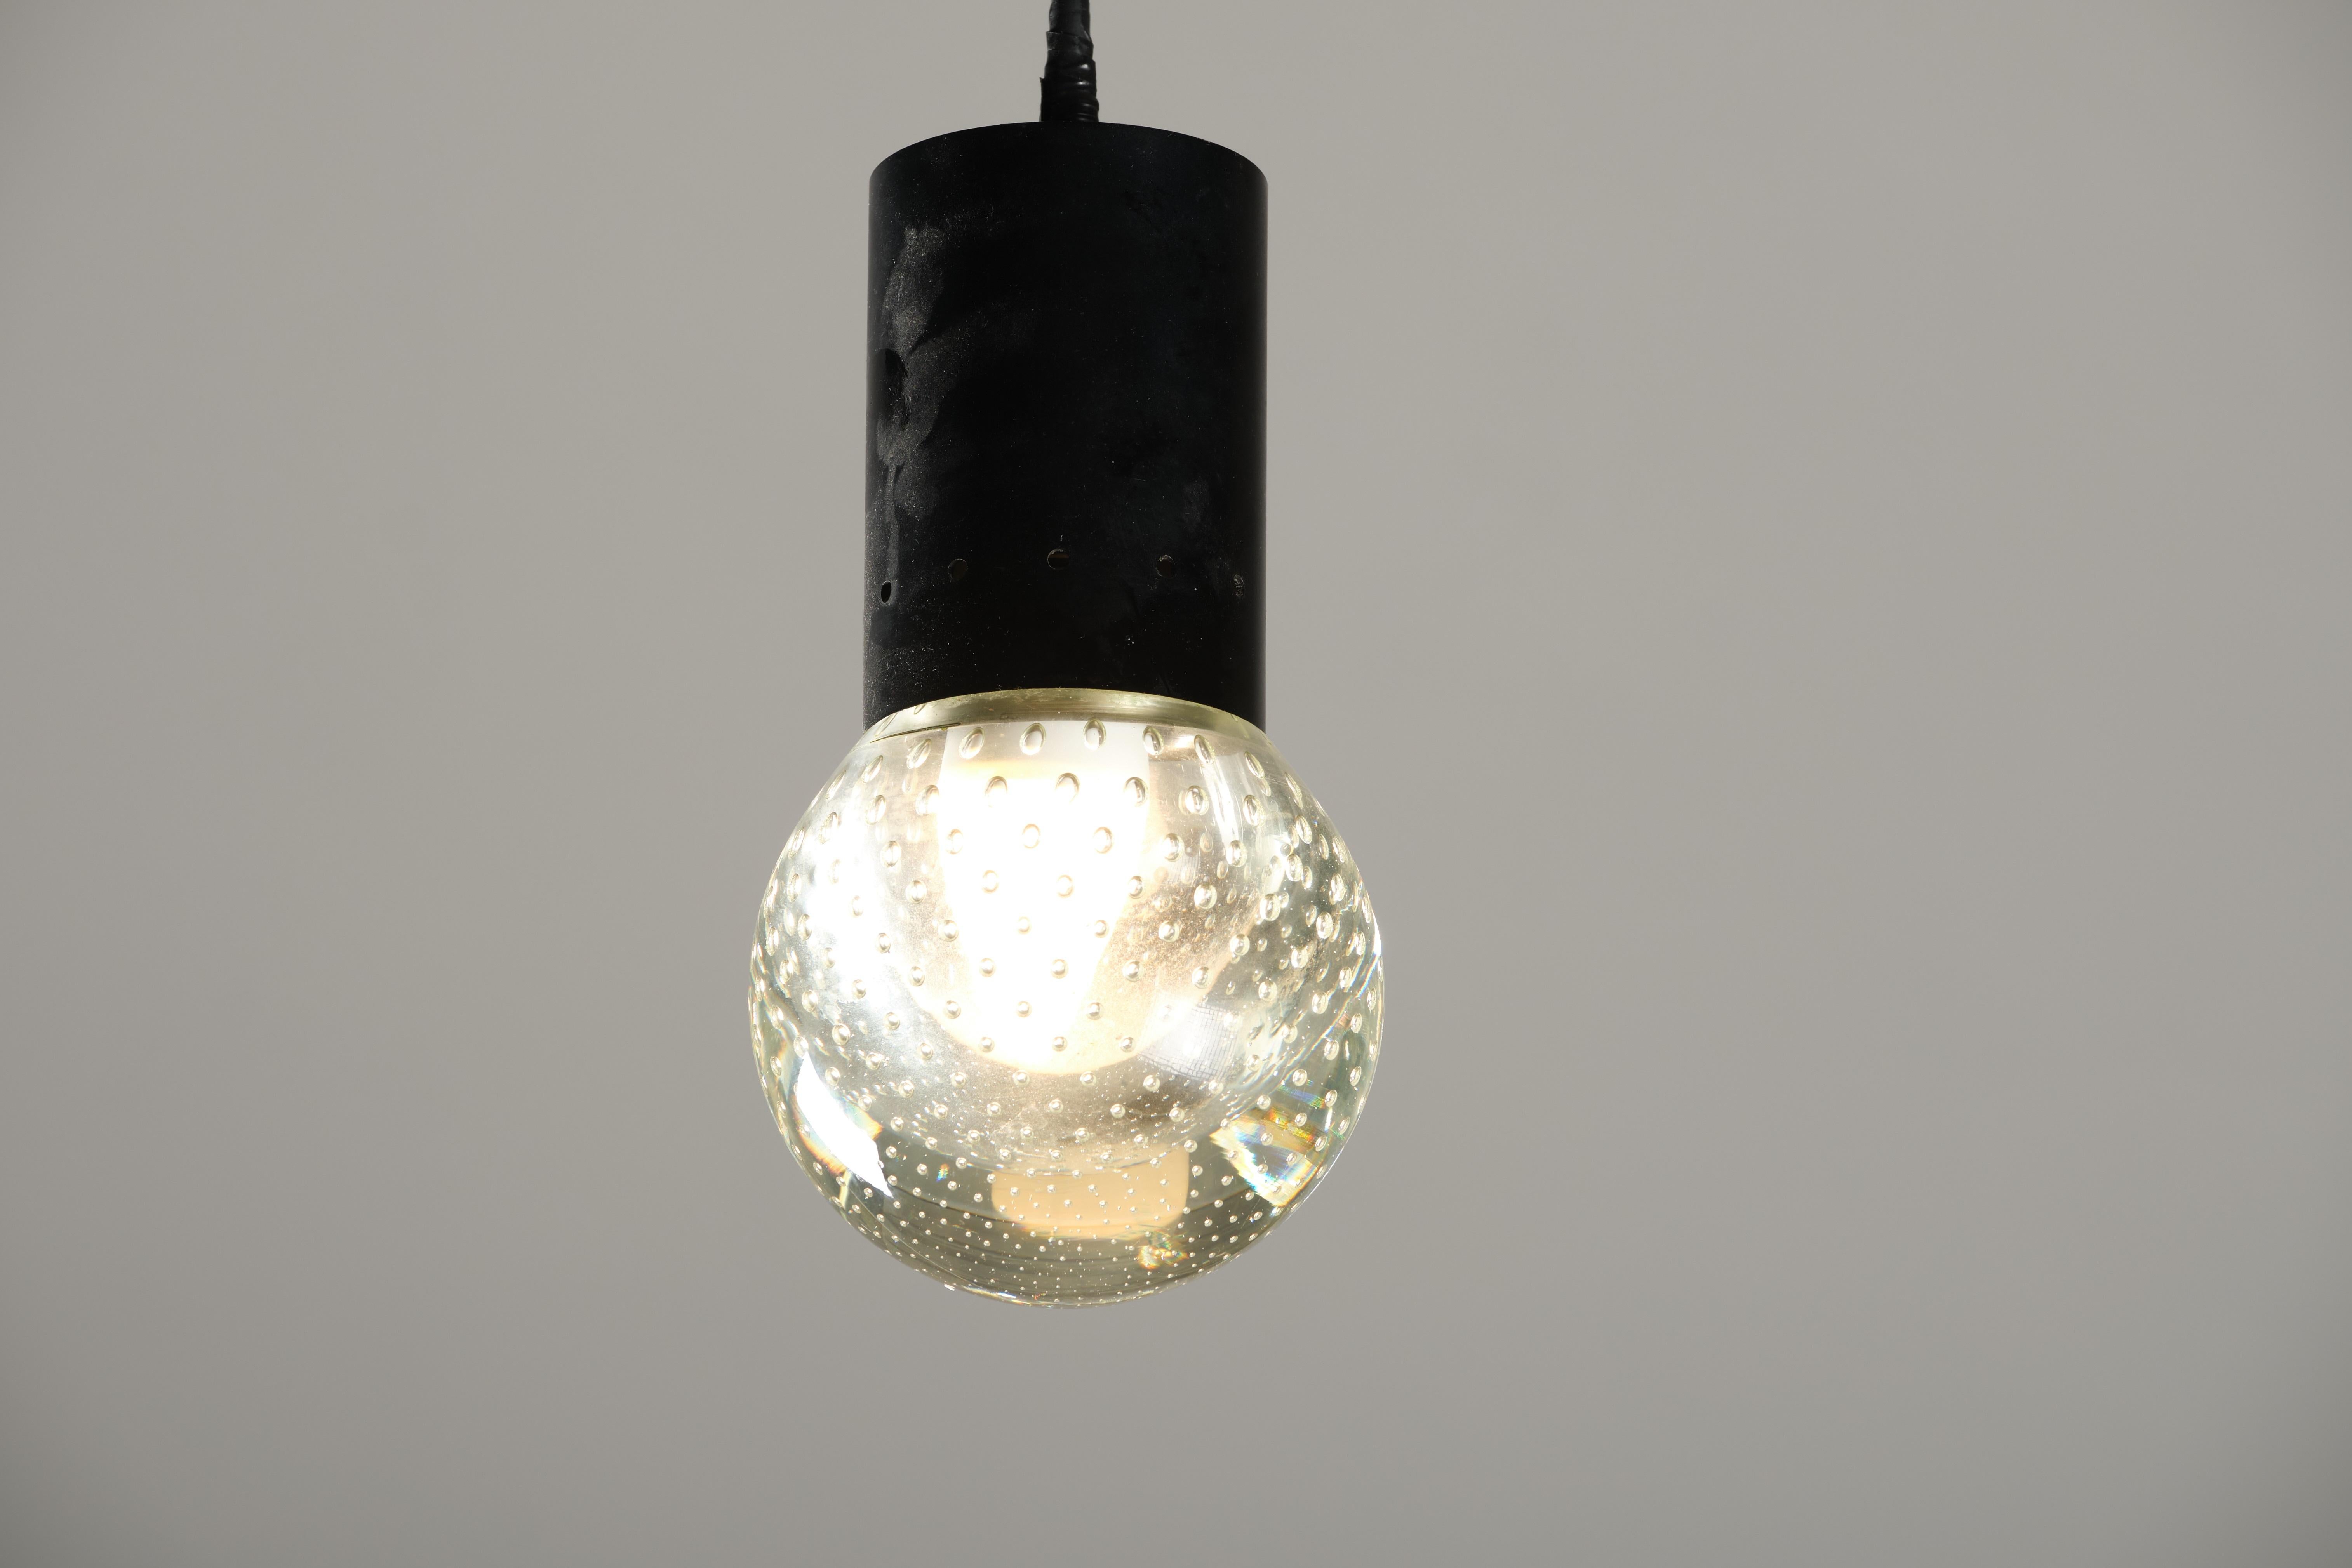 This amazing pendant is the result of unique craftsmanship of Seguso in 1960s. Its elegant spherical glass embellished with mini bubbles add a twist of creativity to this perfectly shaped item.